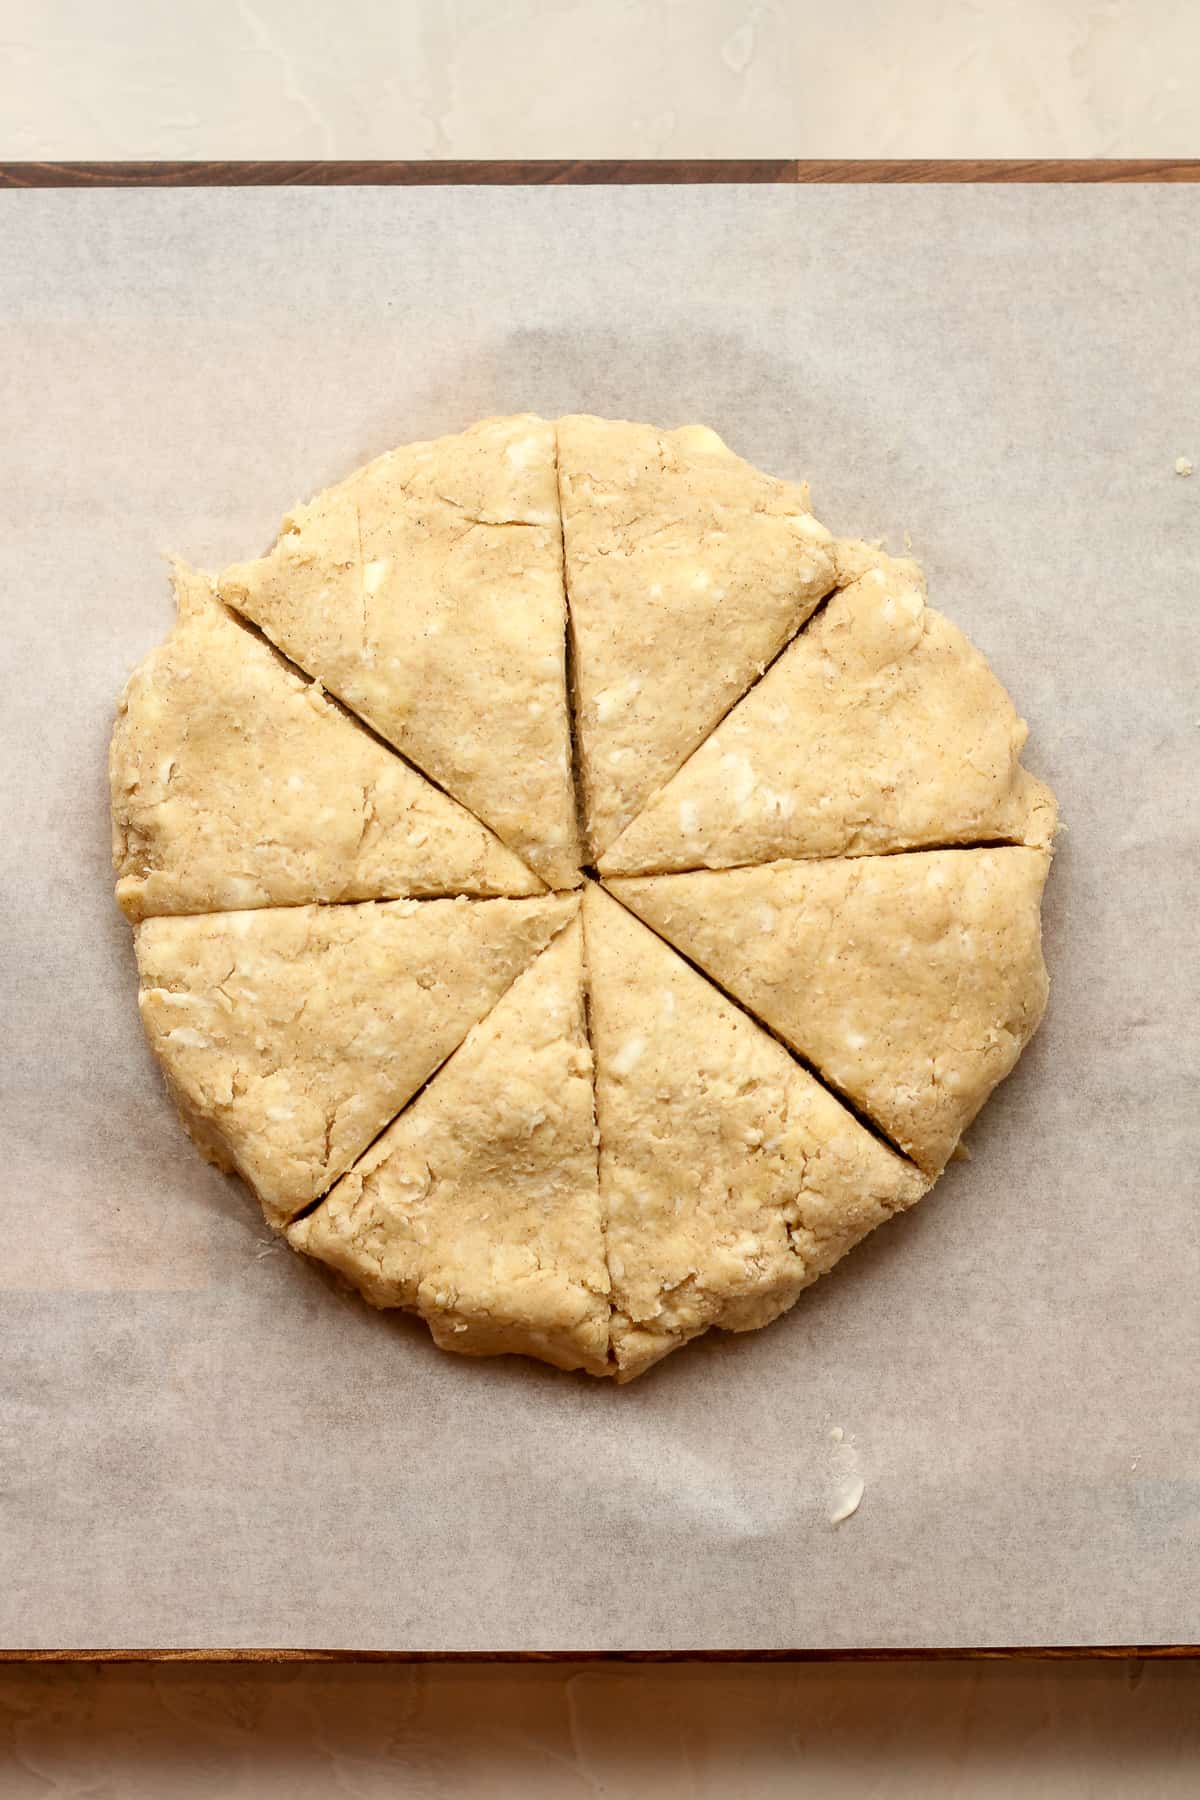 Overhead view of a round of scone dough, cut into 8 equal triangles.